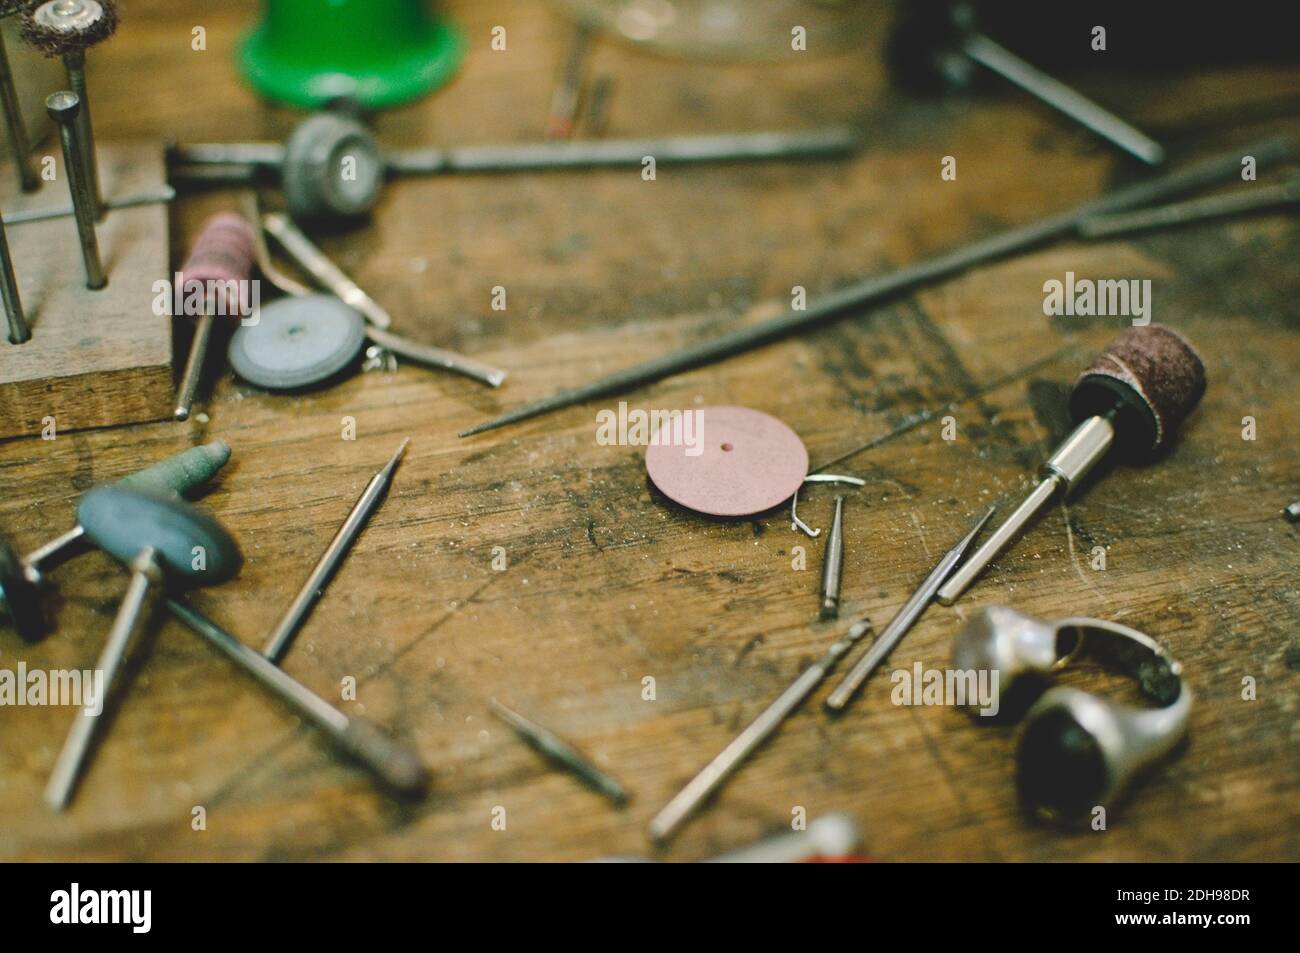 High angle view of jewelry making tools on workbench in workshop Stock Photo